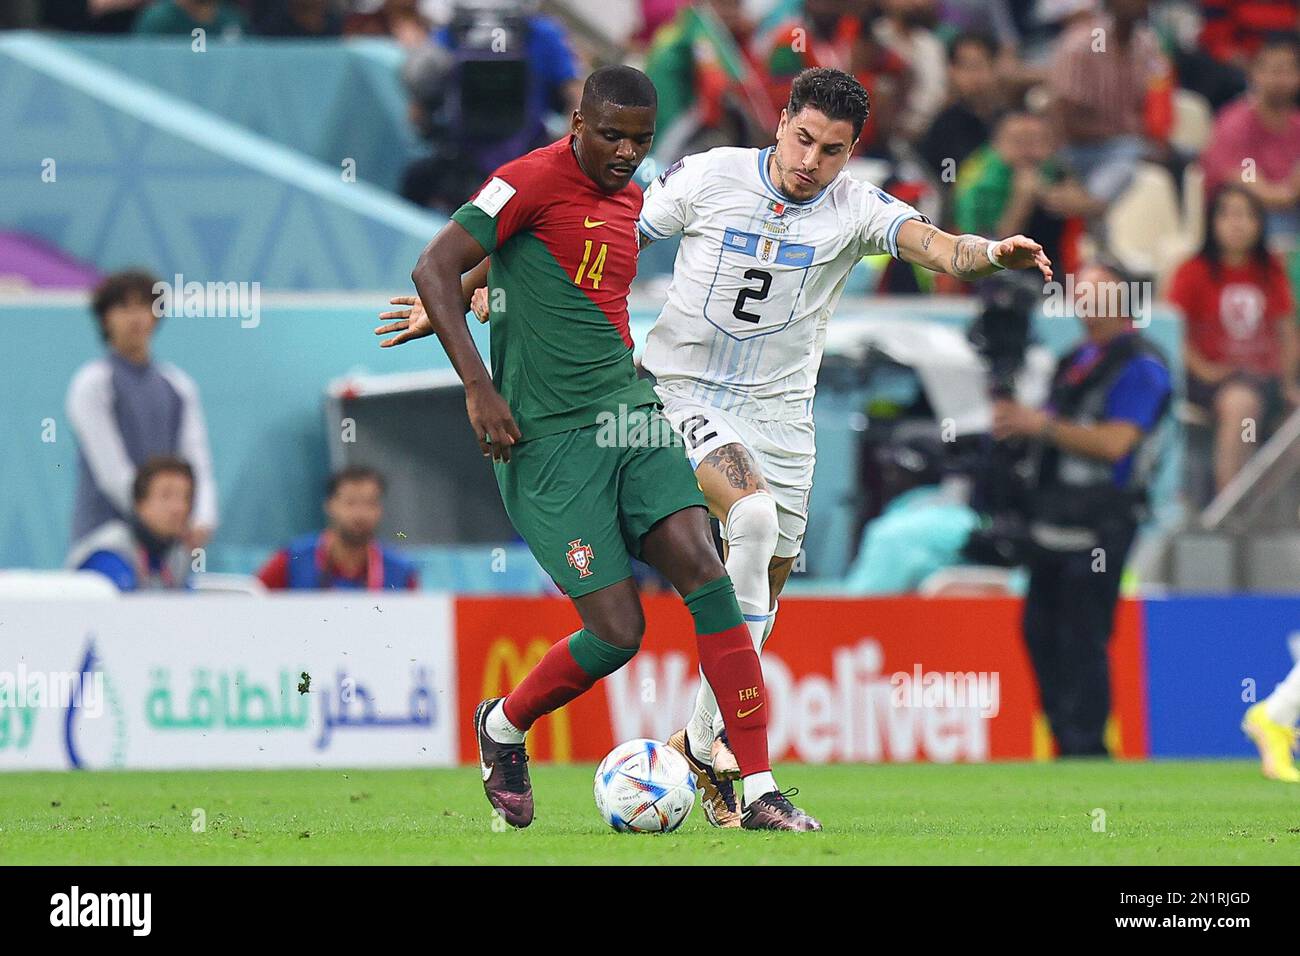 LUSAIL CITY, QATAR - NOVEMBER 28: William Carvalho, Jose Maria Gimenez  during the FIFA World Cup Qatar 2022 Group H match between Portugal and Uruguay at Lusail Stadium on November 28, 2022 in Lusail City, Qatar. (Photo by MB Media) Stock Photo